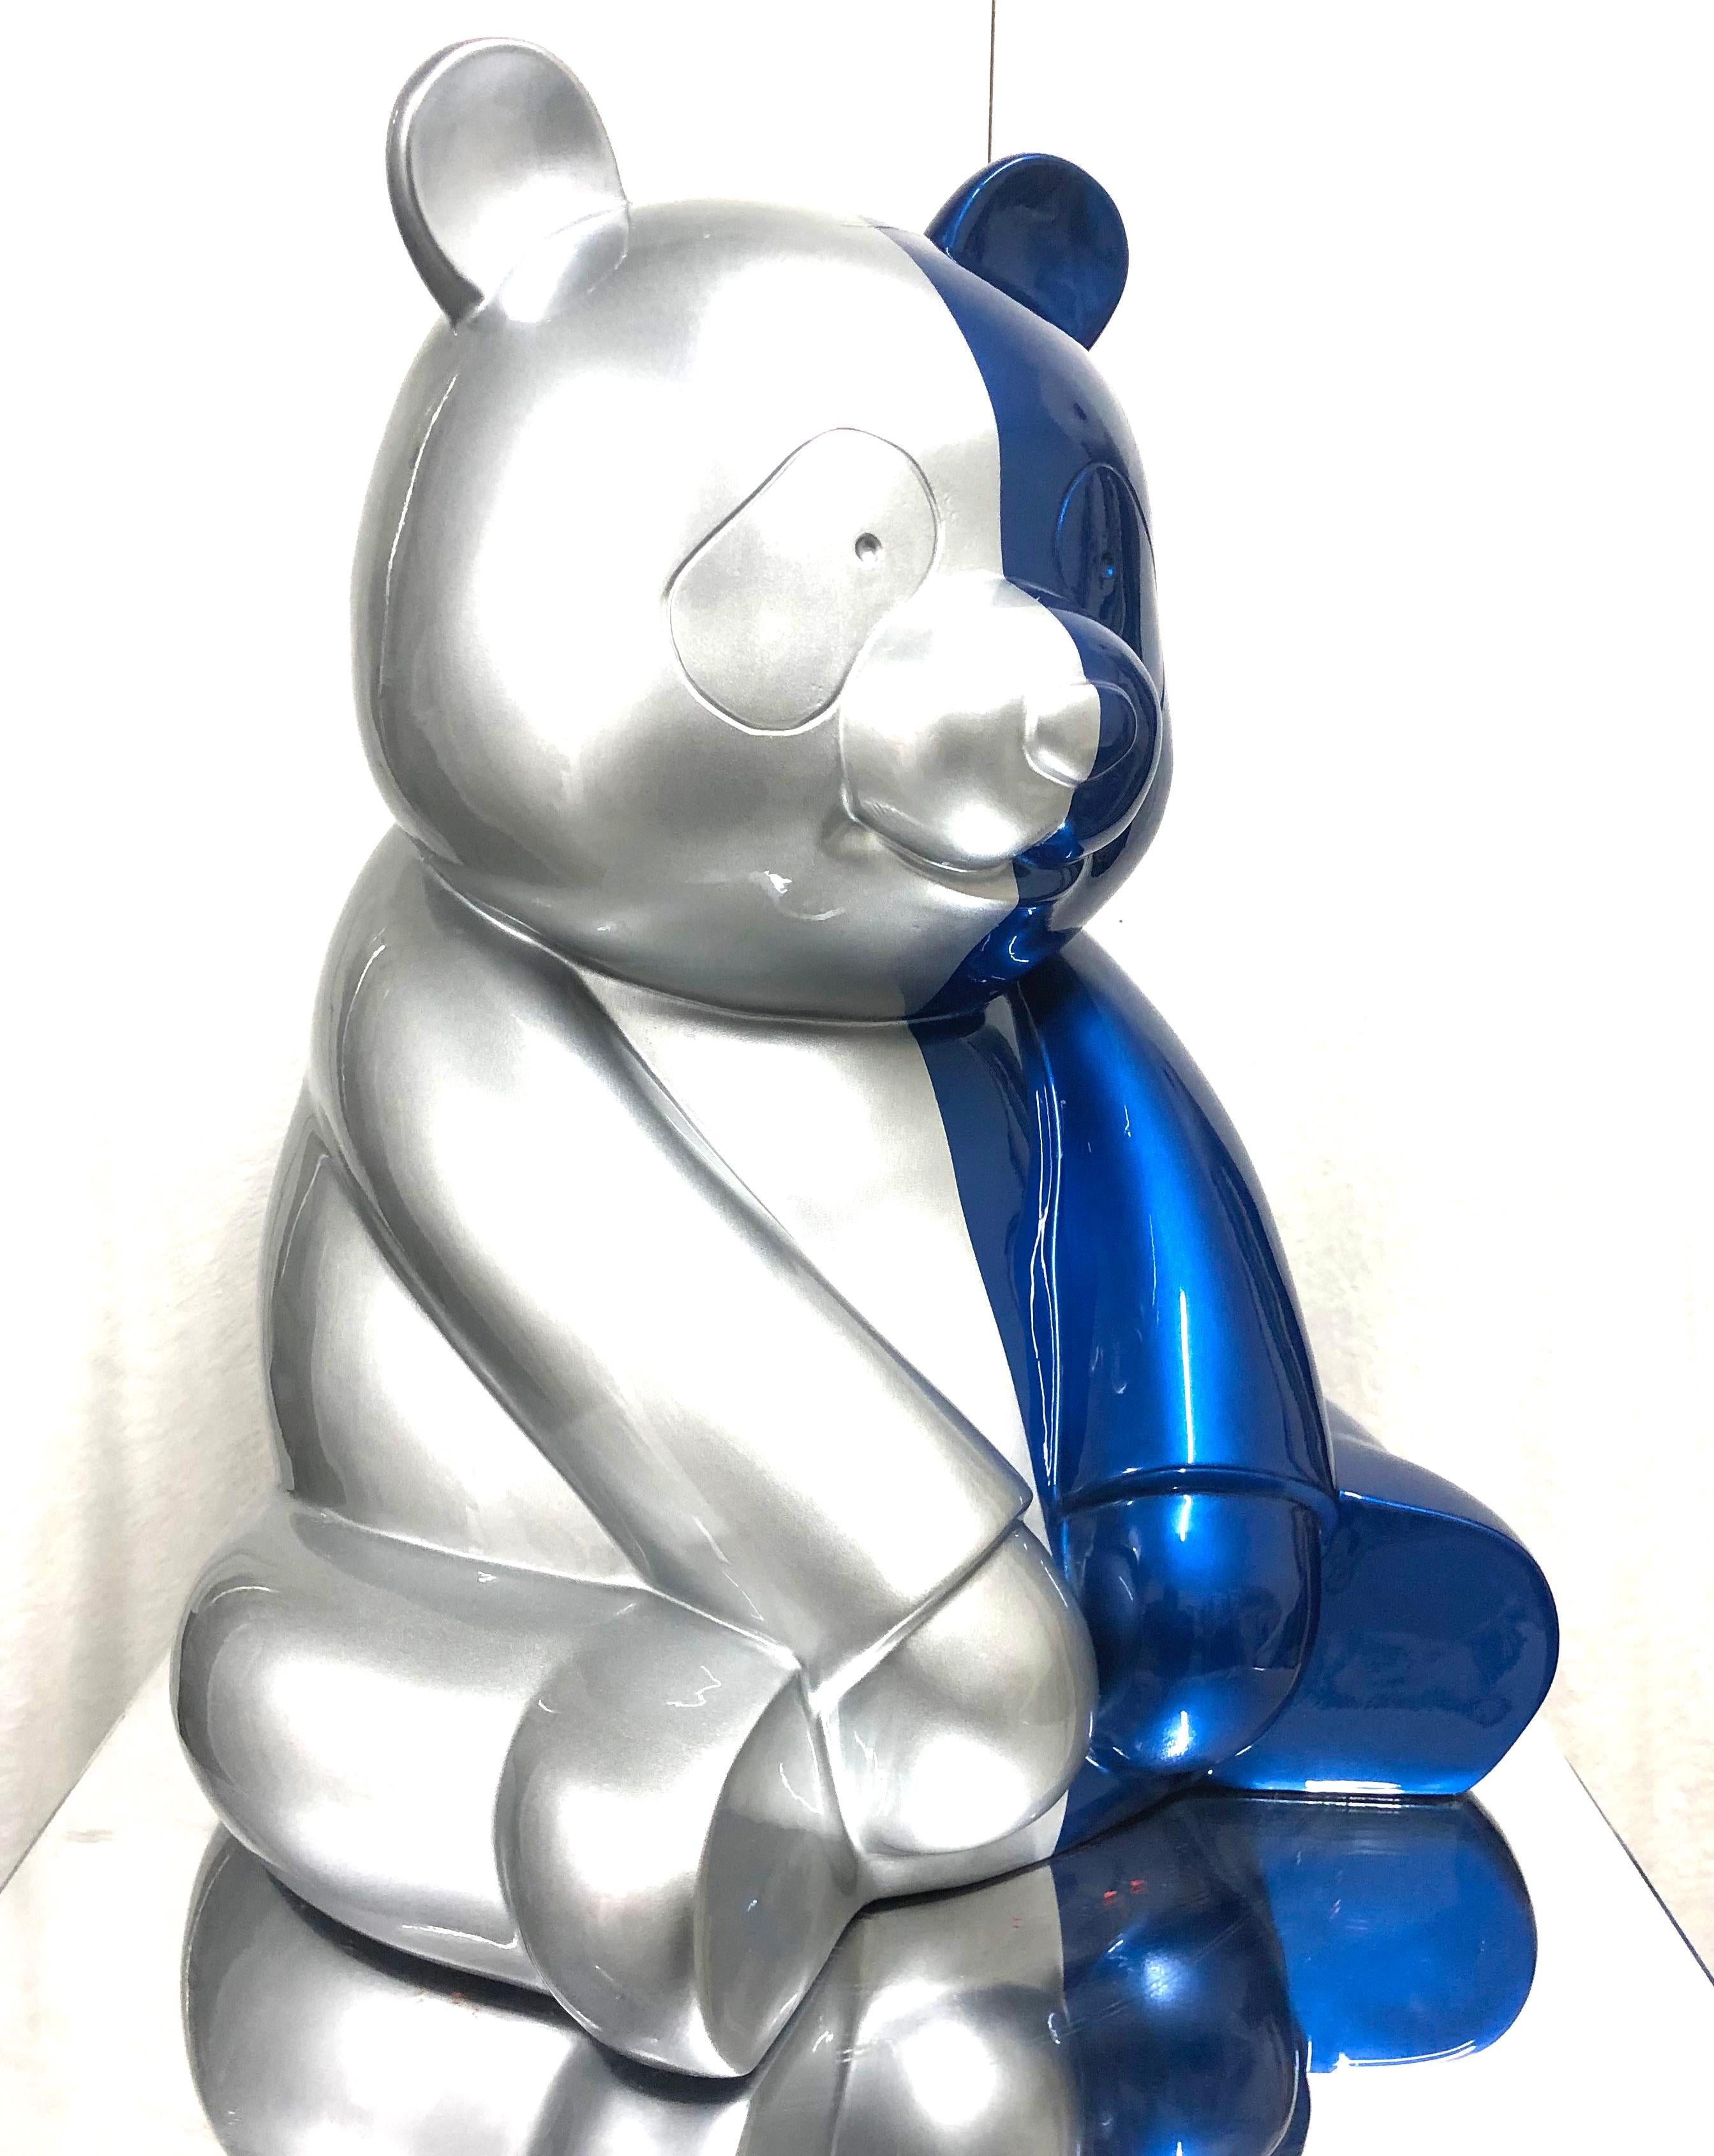 The United Pandasan  : Spectral Symmetry Blu & Silver - Contemporary Sculpture by HIRO ANDO